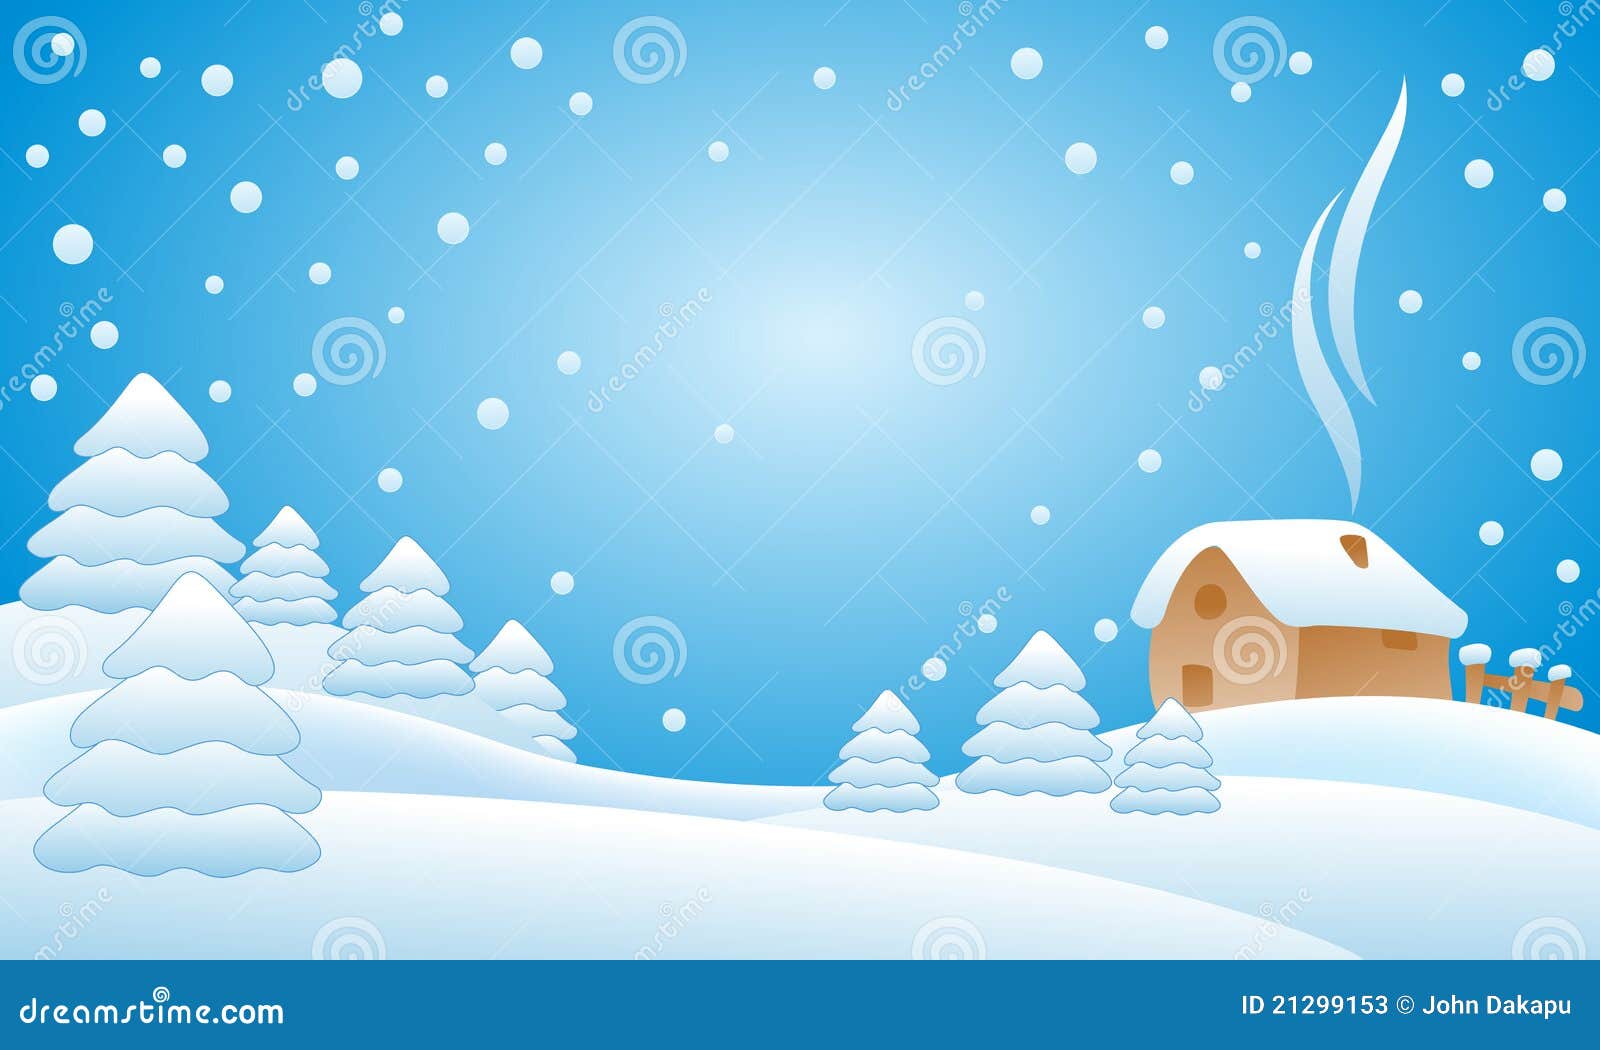 clipart of snow falling - photo #26